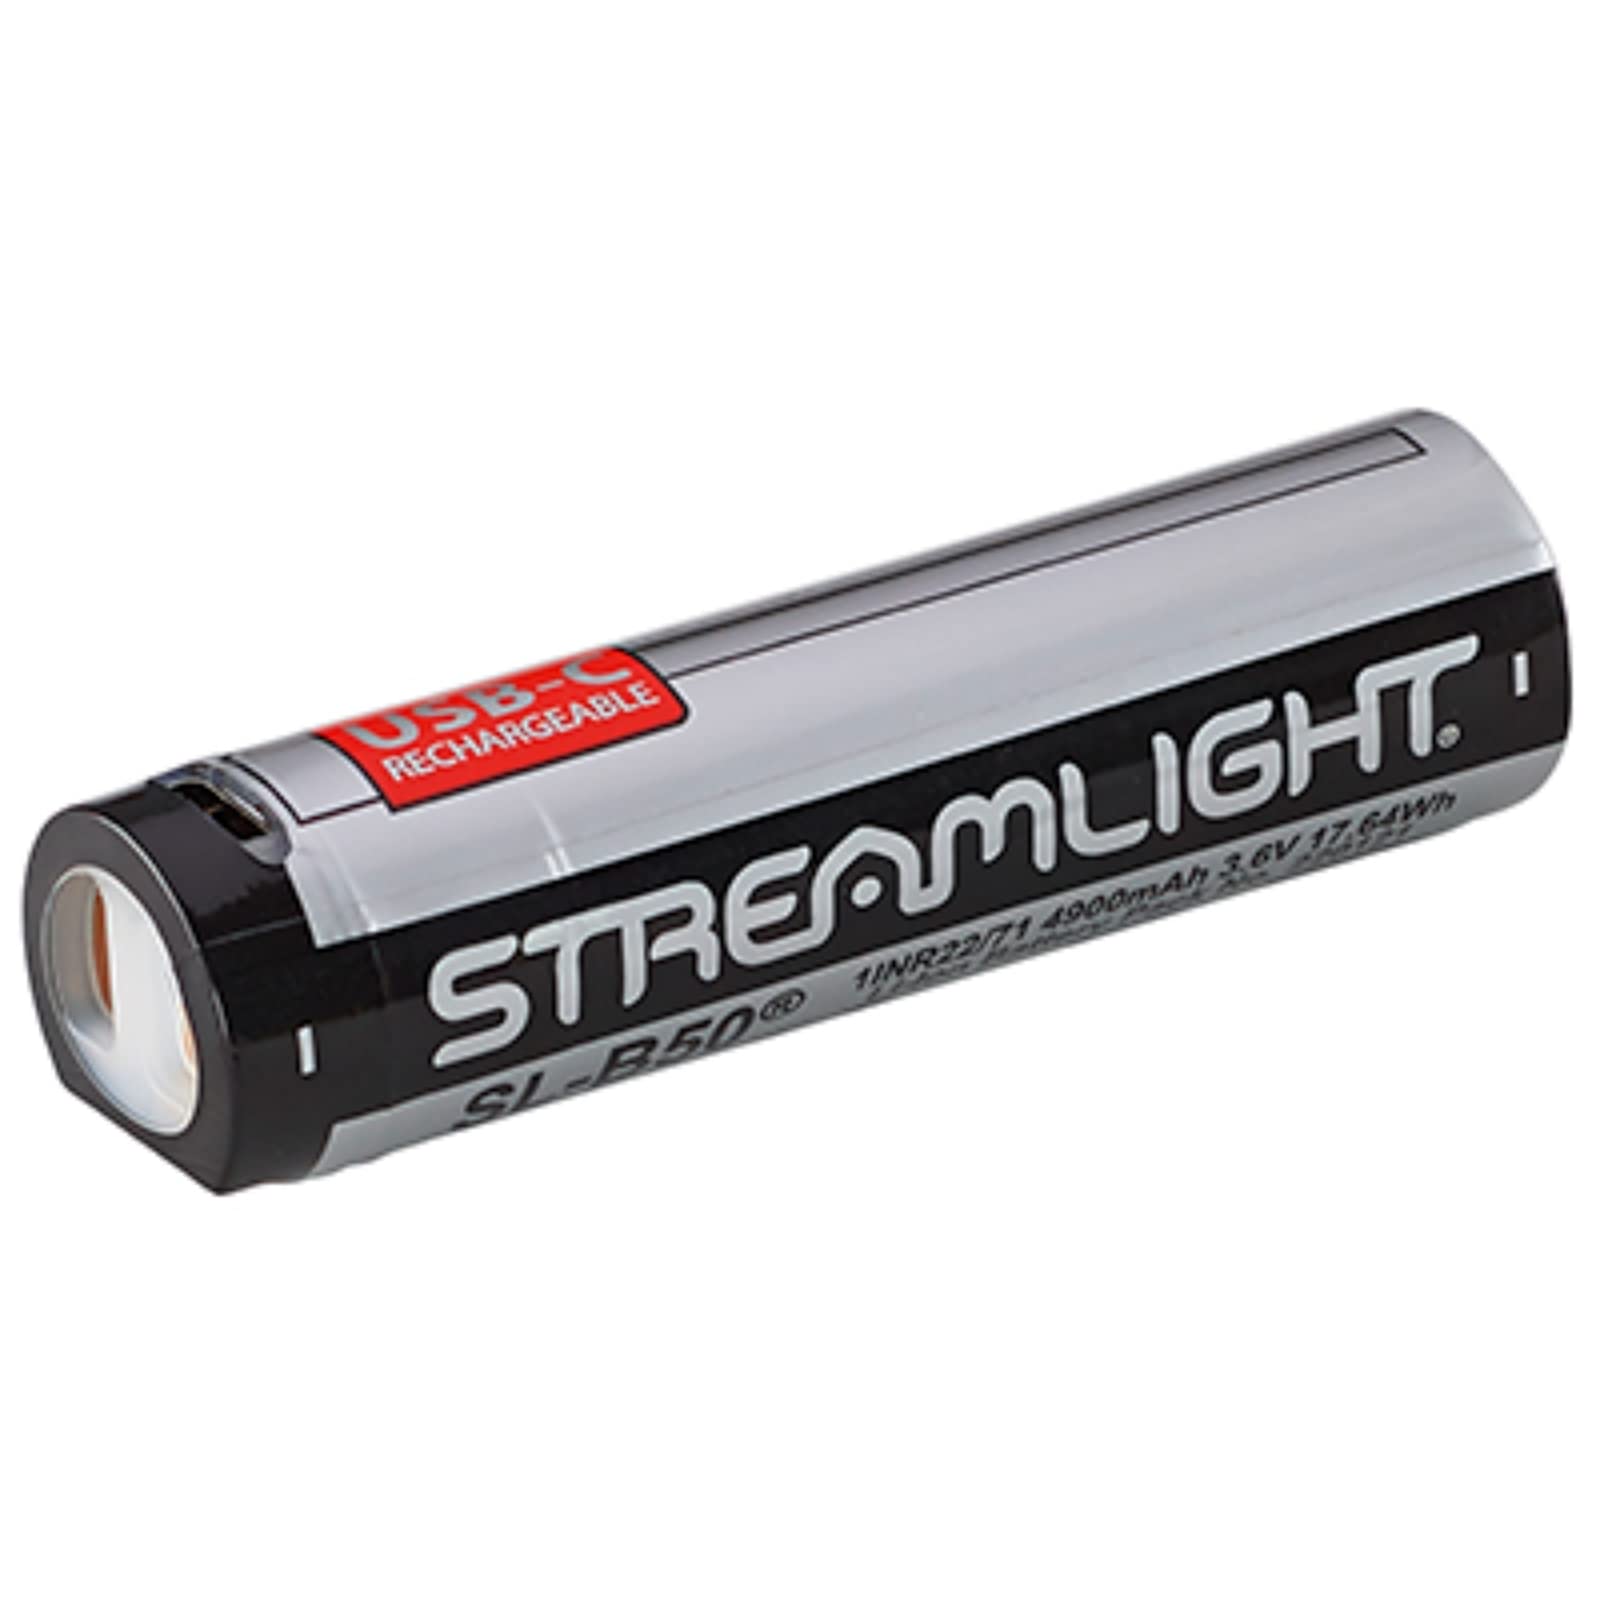 Streamlight 22111 SL-B50 Protected Lithium-Ion USB-C Rechargeable Battery with Integrated Charge Port, 1-Pack